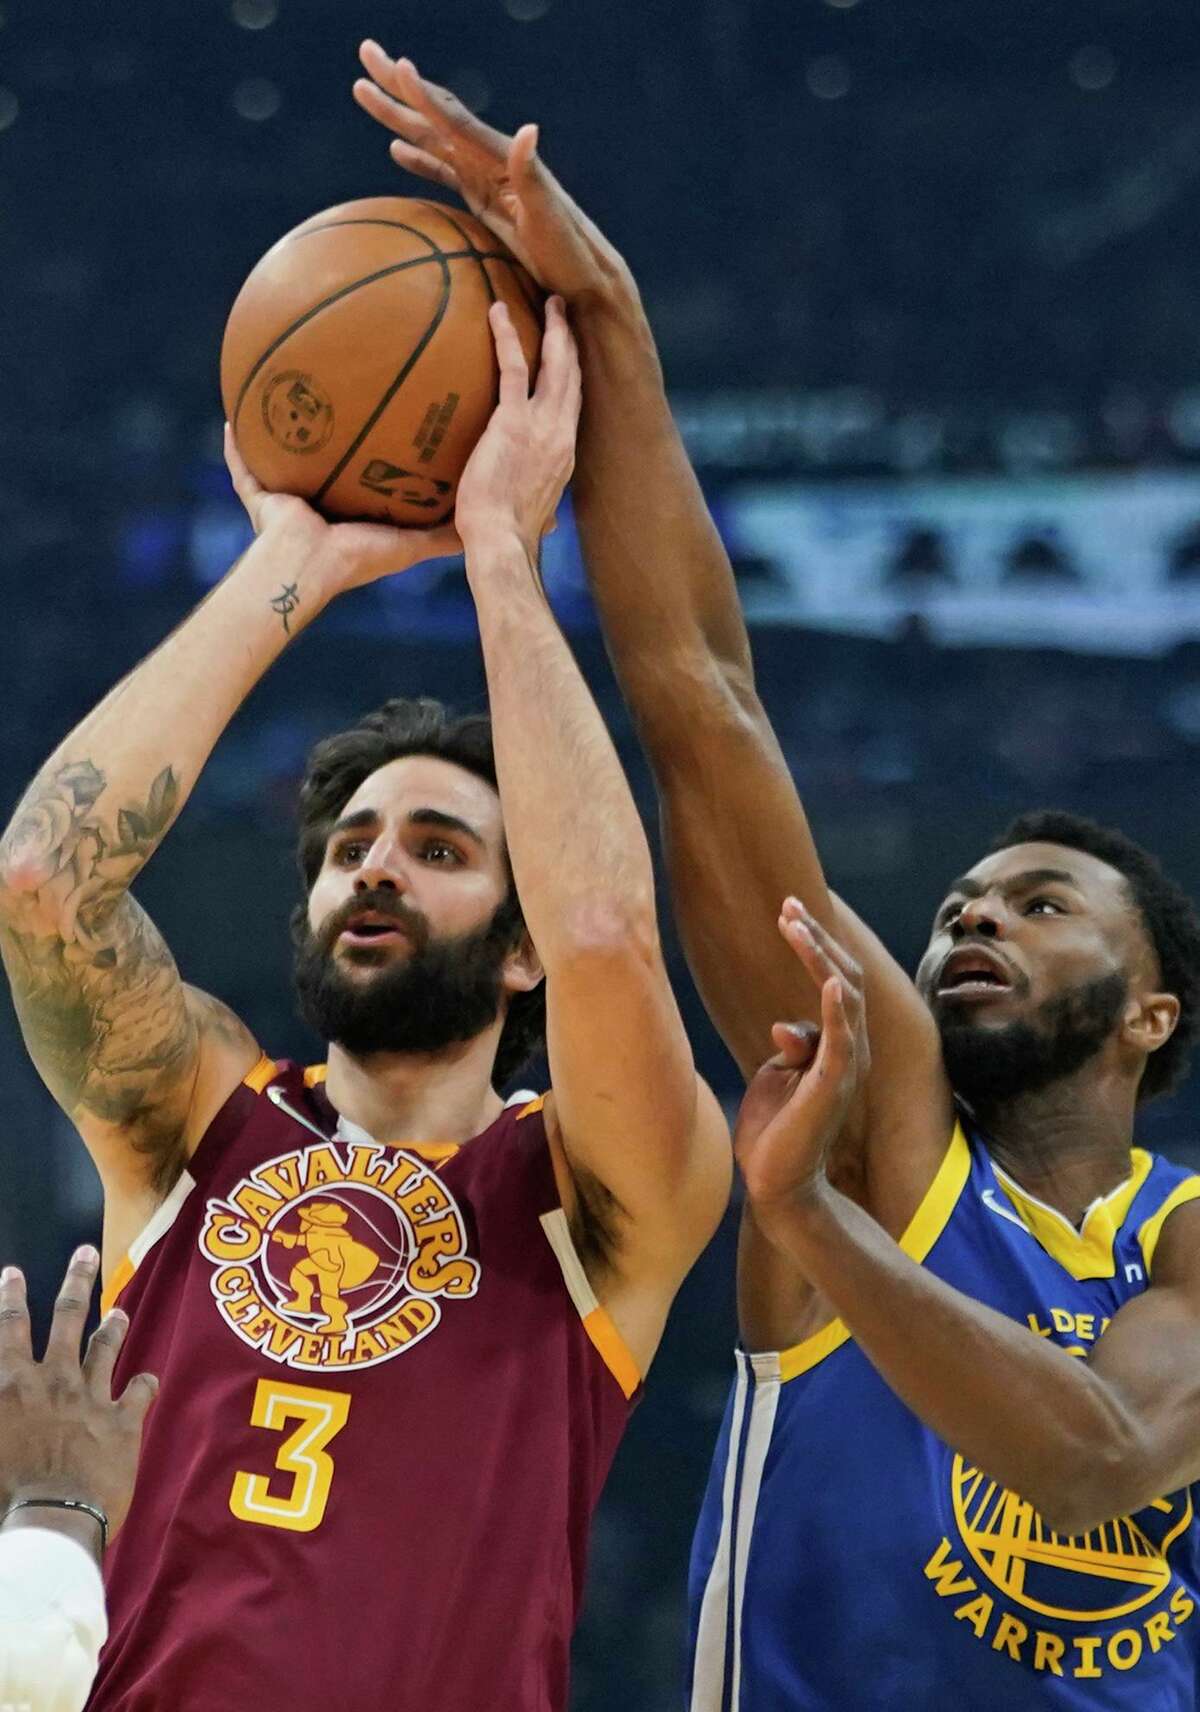 Golden State Warriors' Andrew Wiggins (22) knocks the ball loose from Cleveland Cavaliers' Ricky Rubio (3) as Kevon Looney (5) watches in the first half of an NBA basketball game, Thursday, Nov. 18, 2021, in Cleveland. (AP Photo/Tony Dejak)